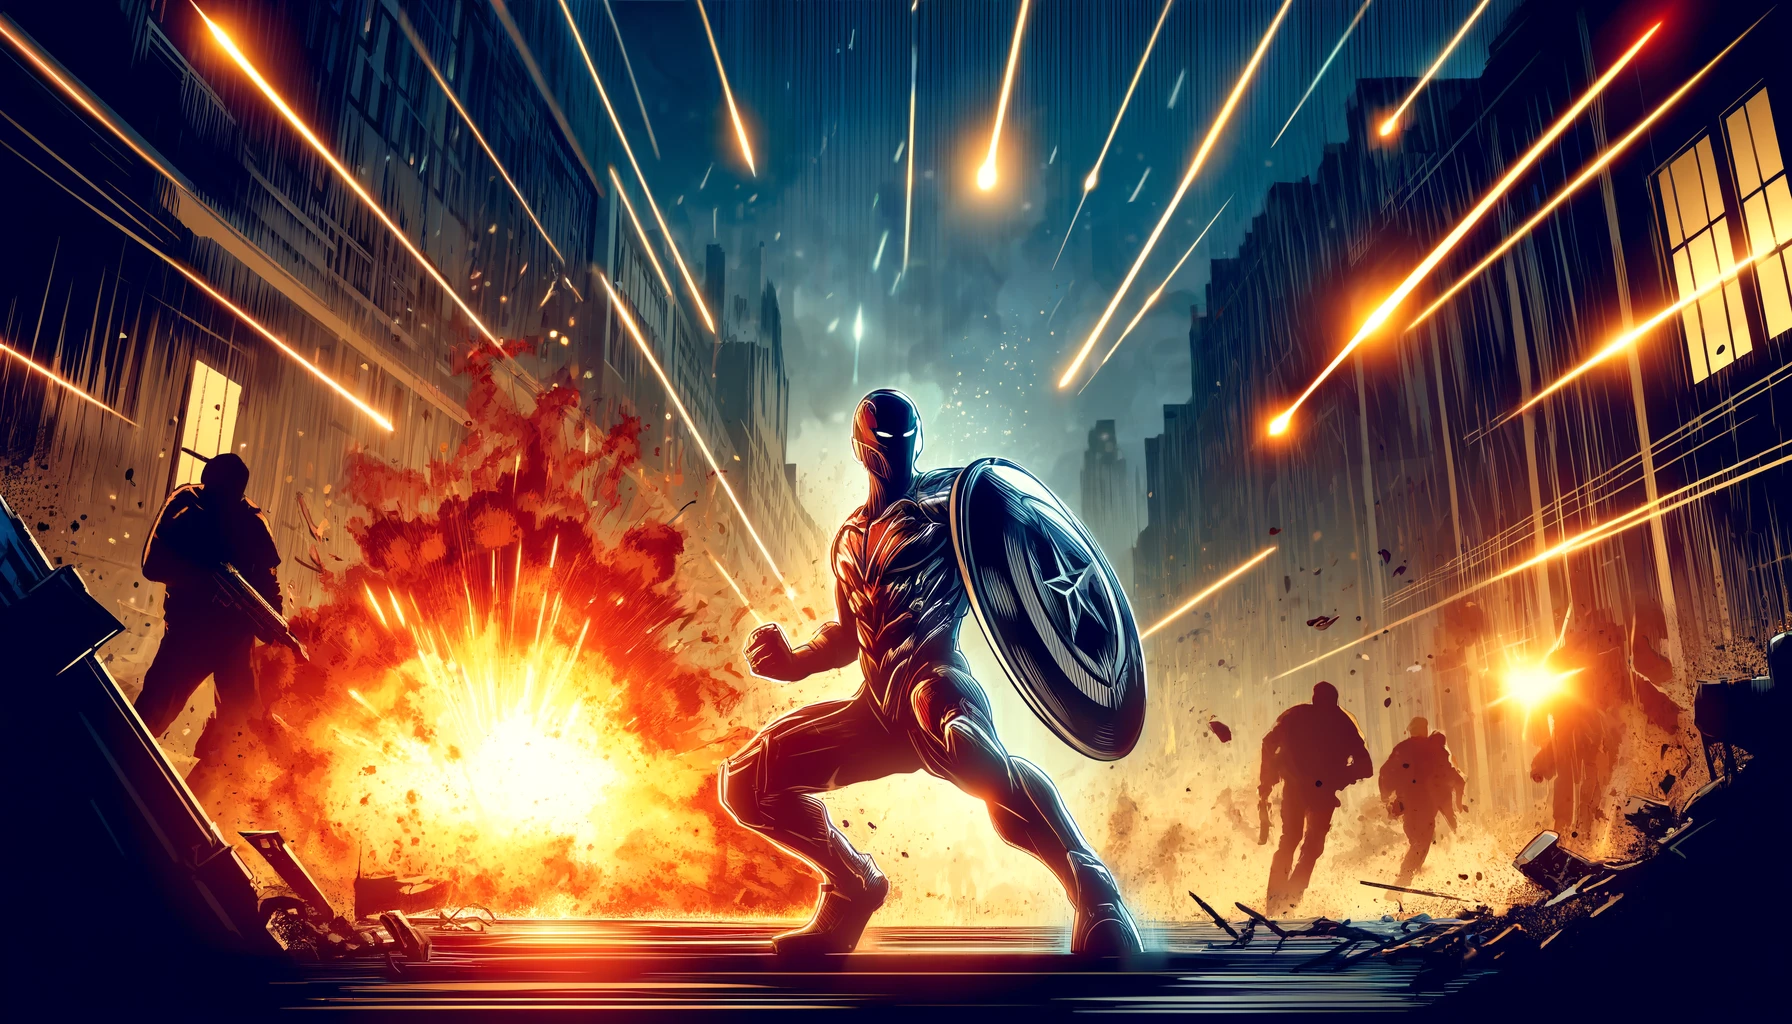 A superhero with a shield in the center of an explosion and a shootout against the backdrop of a night city.